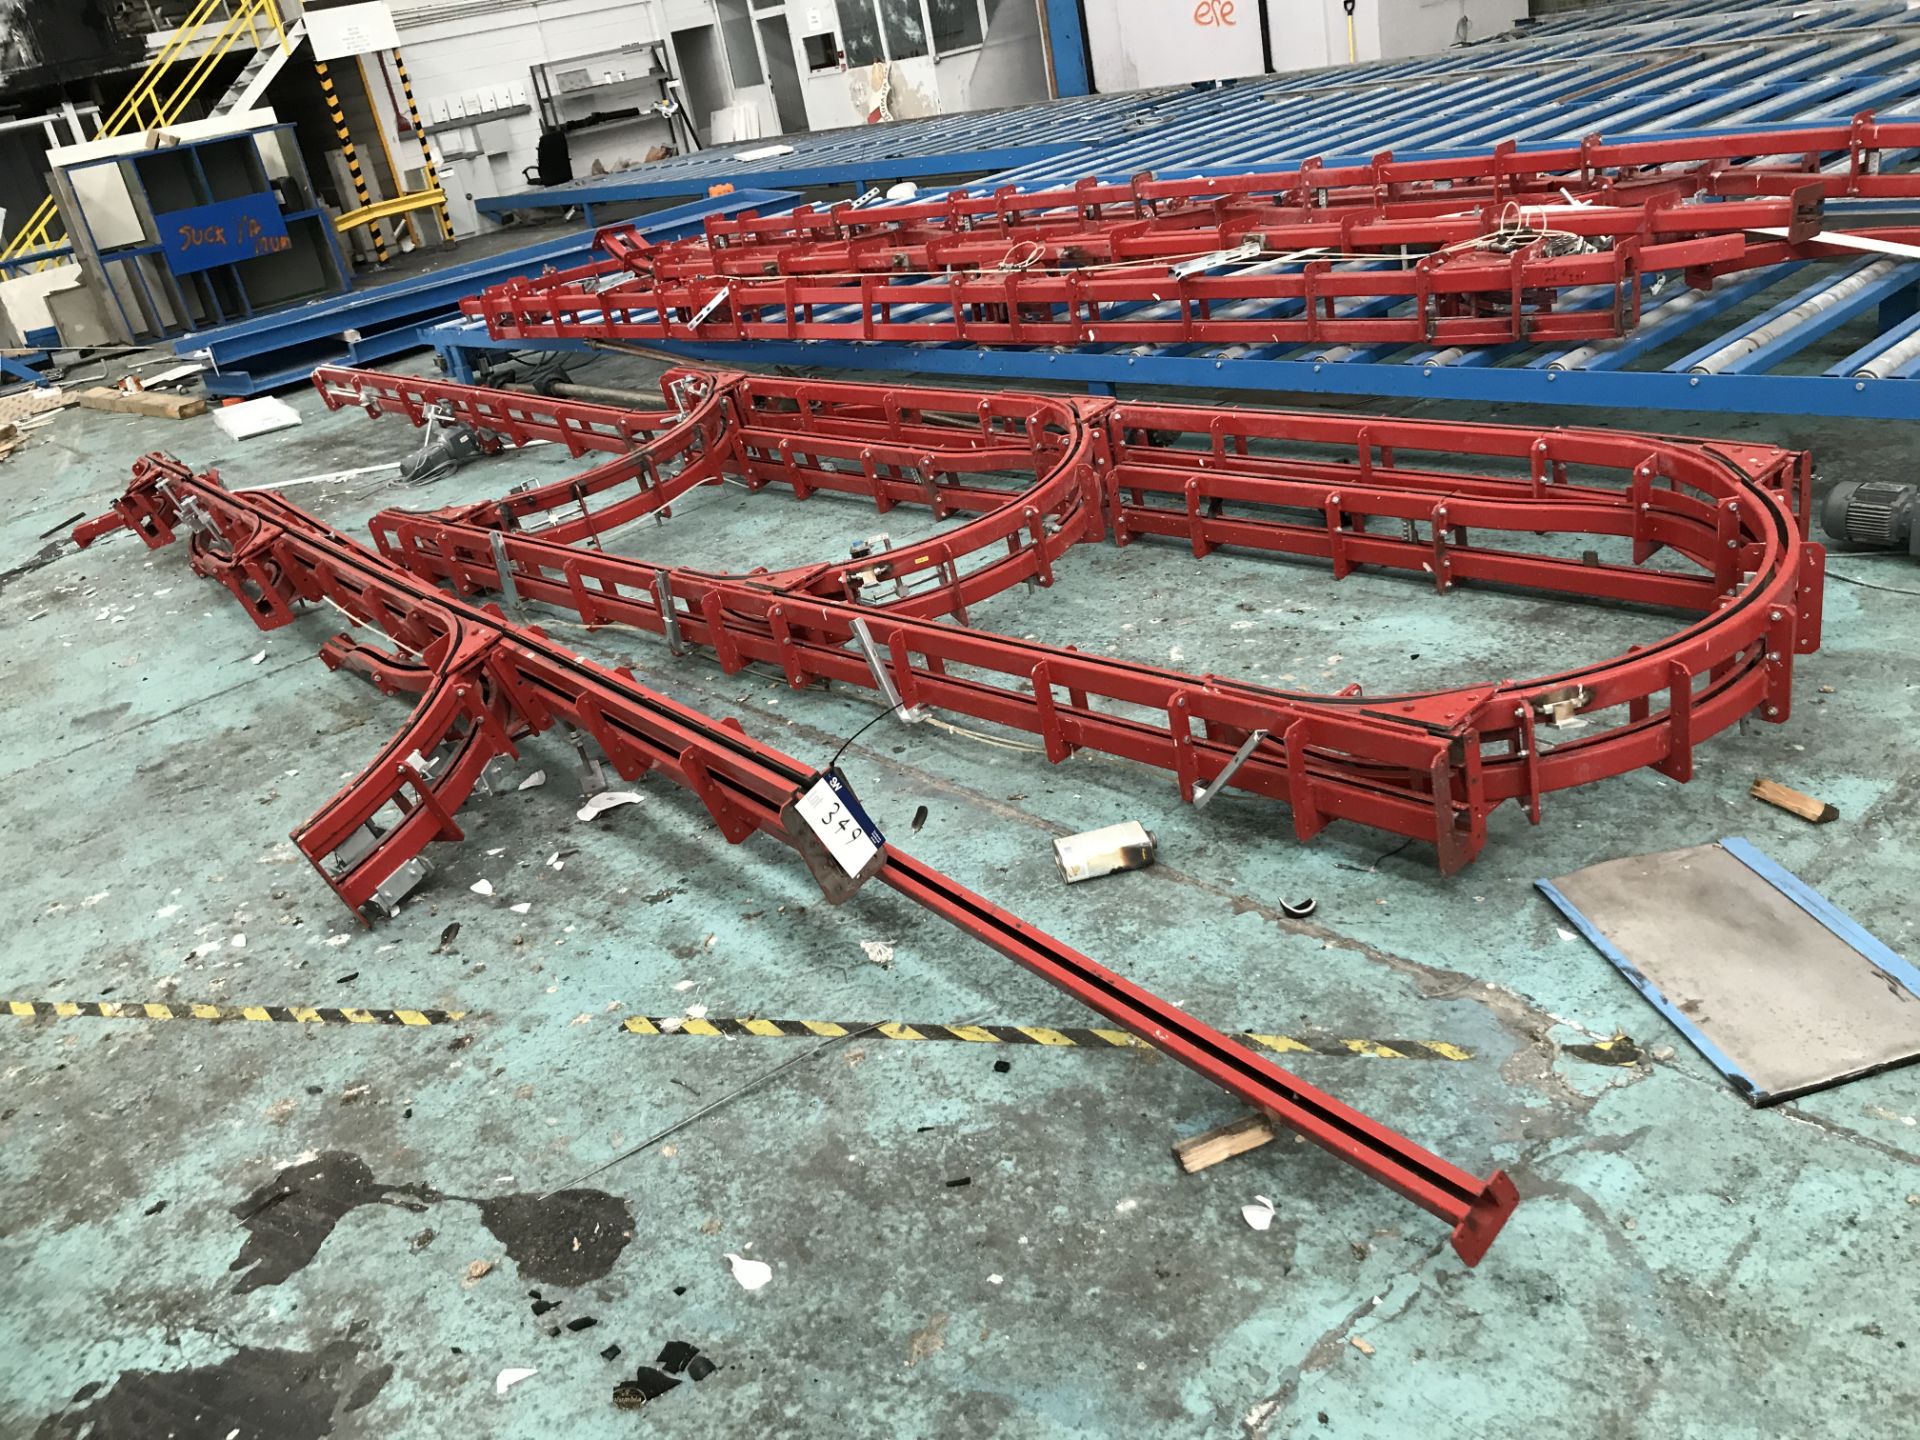 Assorted Overhead Conveyors & Gear Shafts, as set out in one area